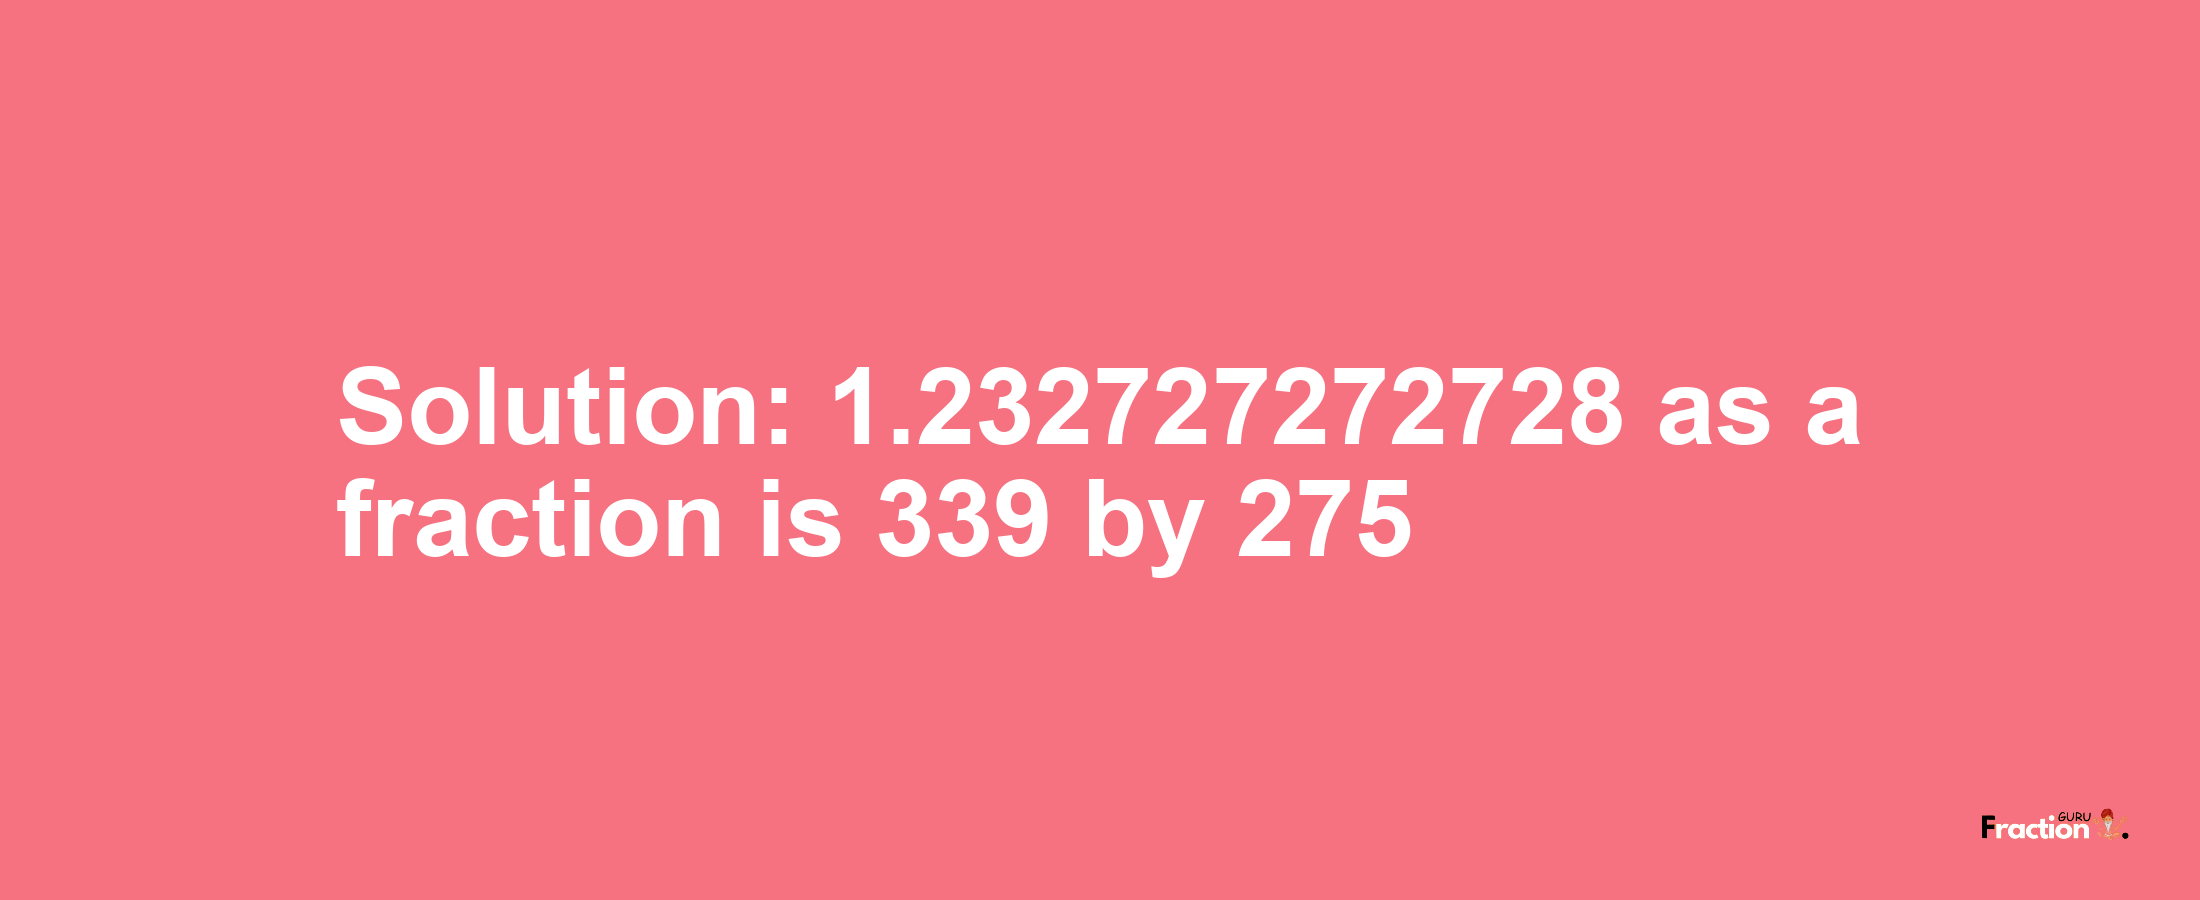 Solution:1.232727272728 as a fraction is 339/275